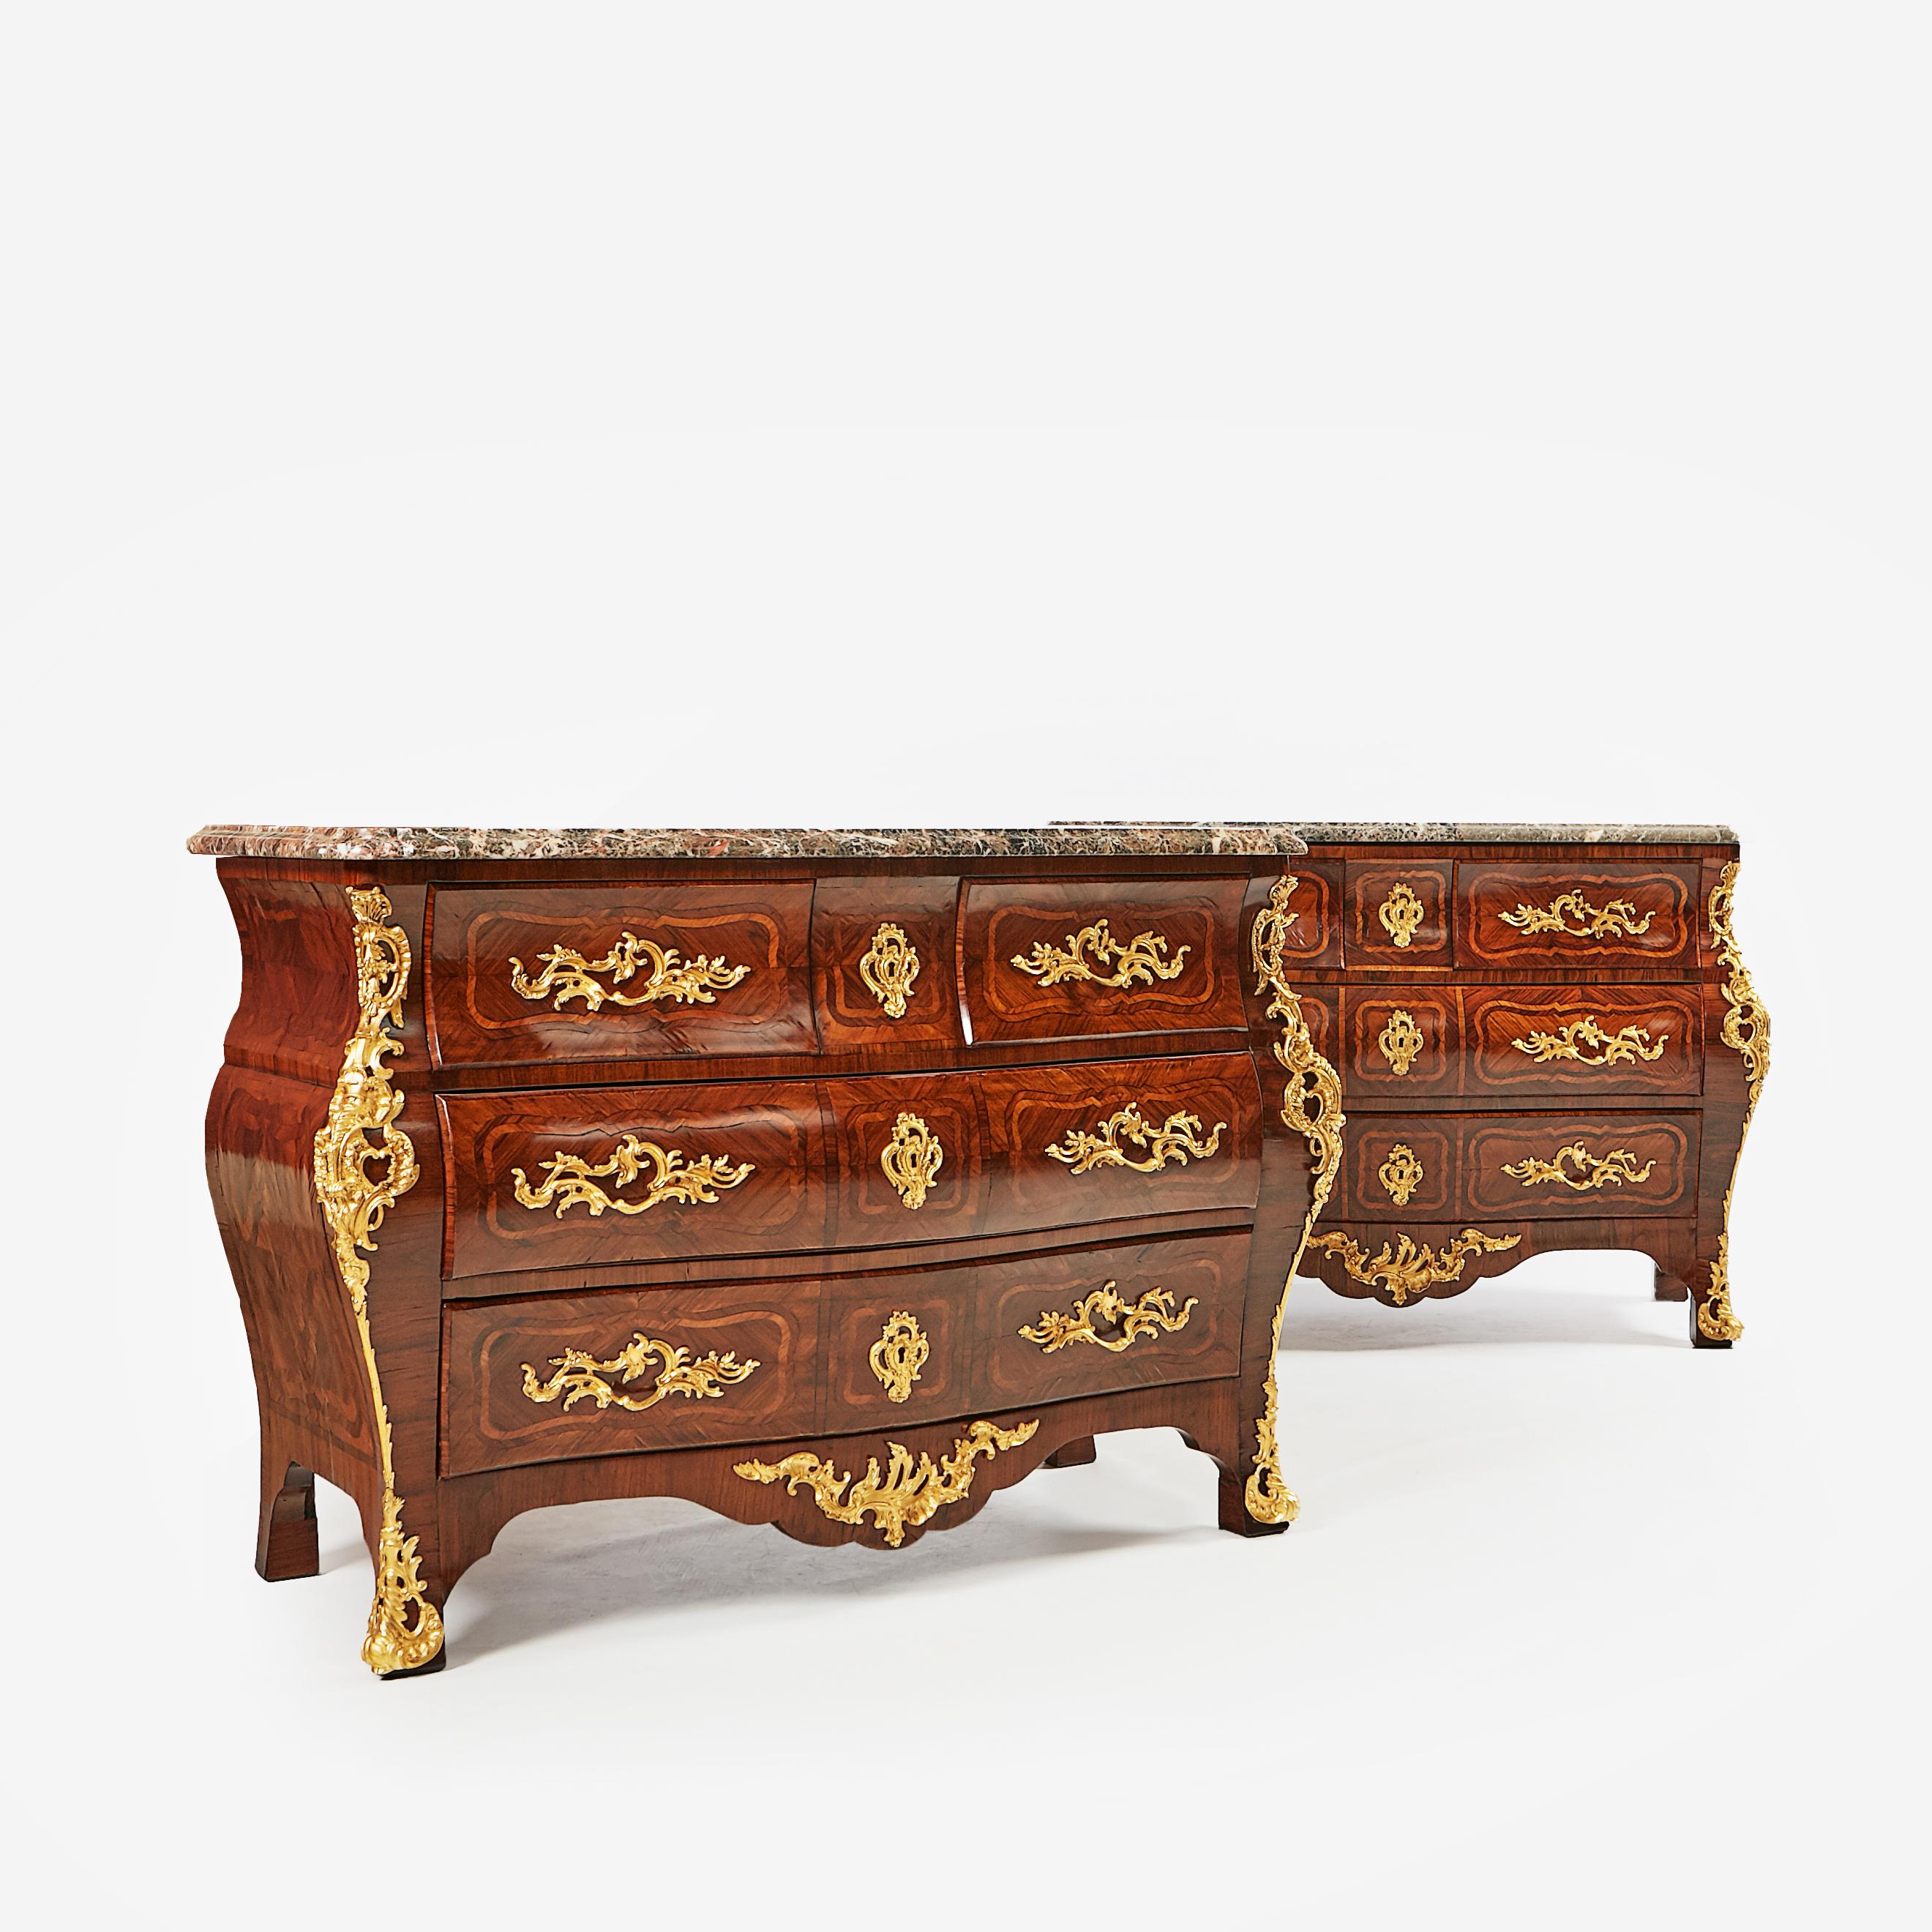 A fine pair of 19th century French commodes in the Louis XV style. Constructed in bookmatched kingwood veneers, inlaid with floral motifs, richly decorated with fine ormulo mounts, the original serpentine Breche d'Alep tops with a thumb moulded